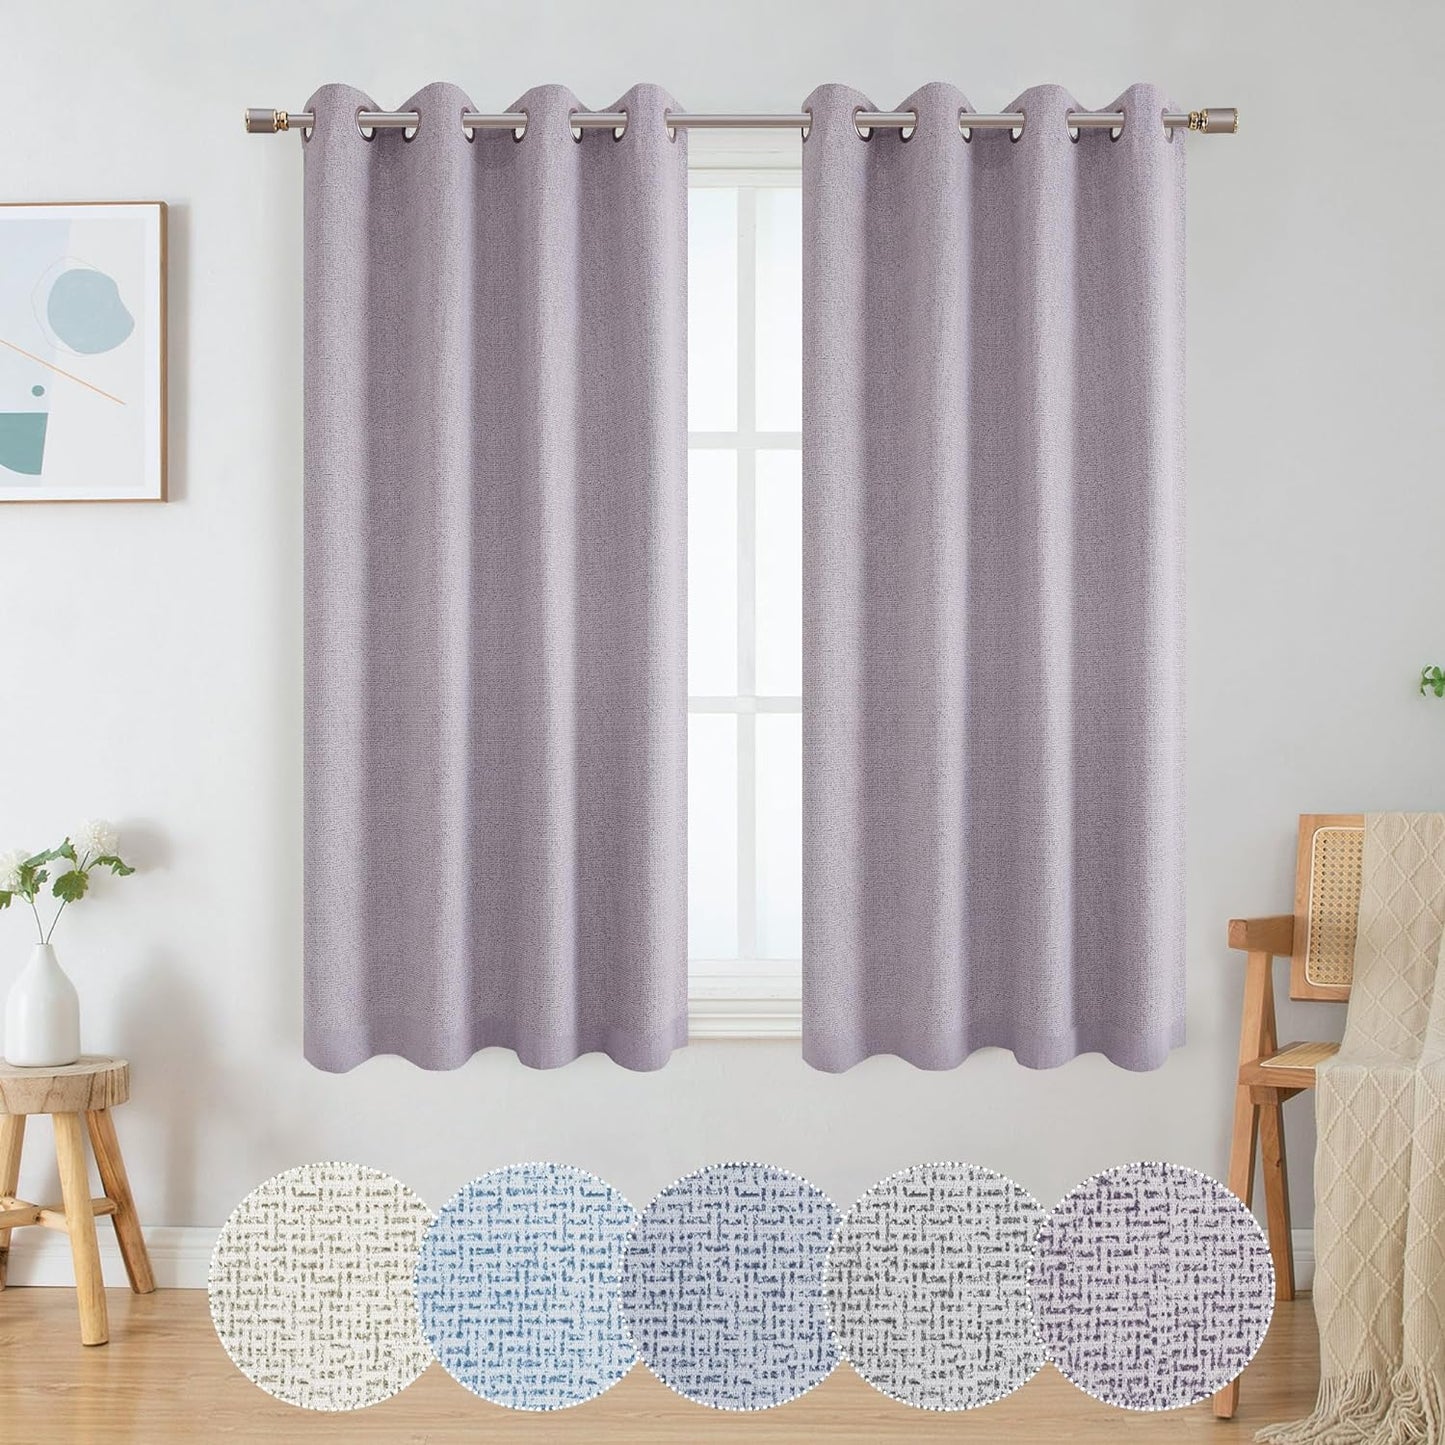 OWENIE Luke Black Out Curtains 63 Inch Long 2 Panels for Bedroom, Geometric Printed Completely Blackout Room Darkening Curtains, Grommet Thermal Insulated Living Room Curtain, 2 PCS, Each 42Wx63L Inch  OWENIE Purple 42"W X 54"L | 2 Pcs 